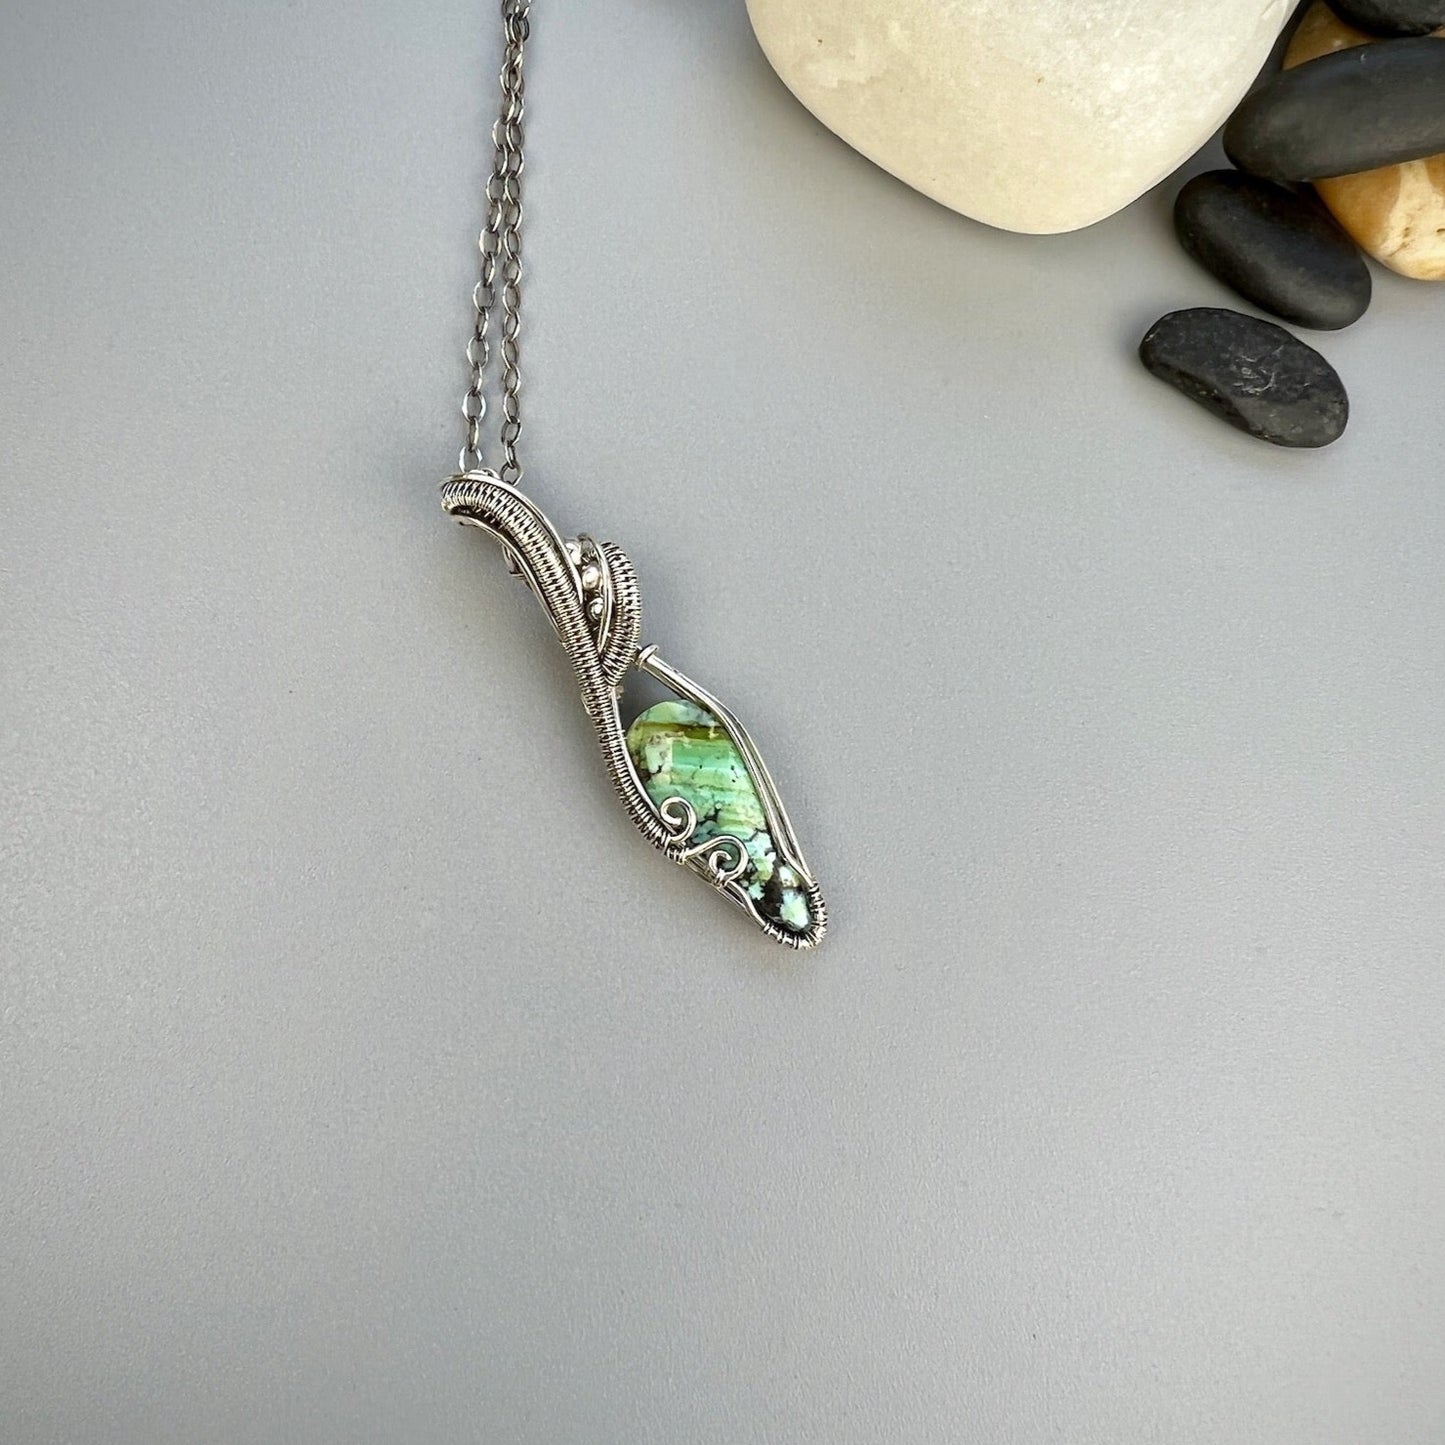 Sterling Silver Turquoise Pendant with Elegant Woven Accents - Silver Dryad Pendant